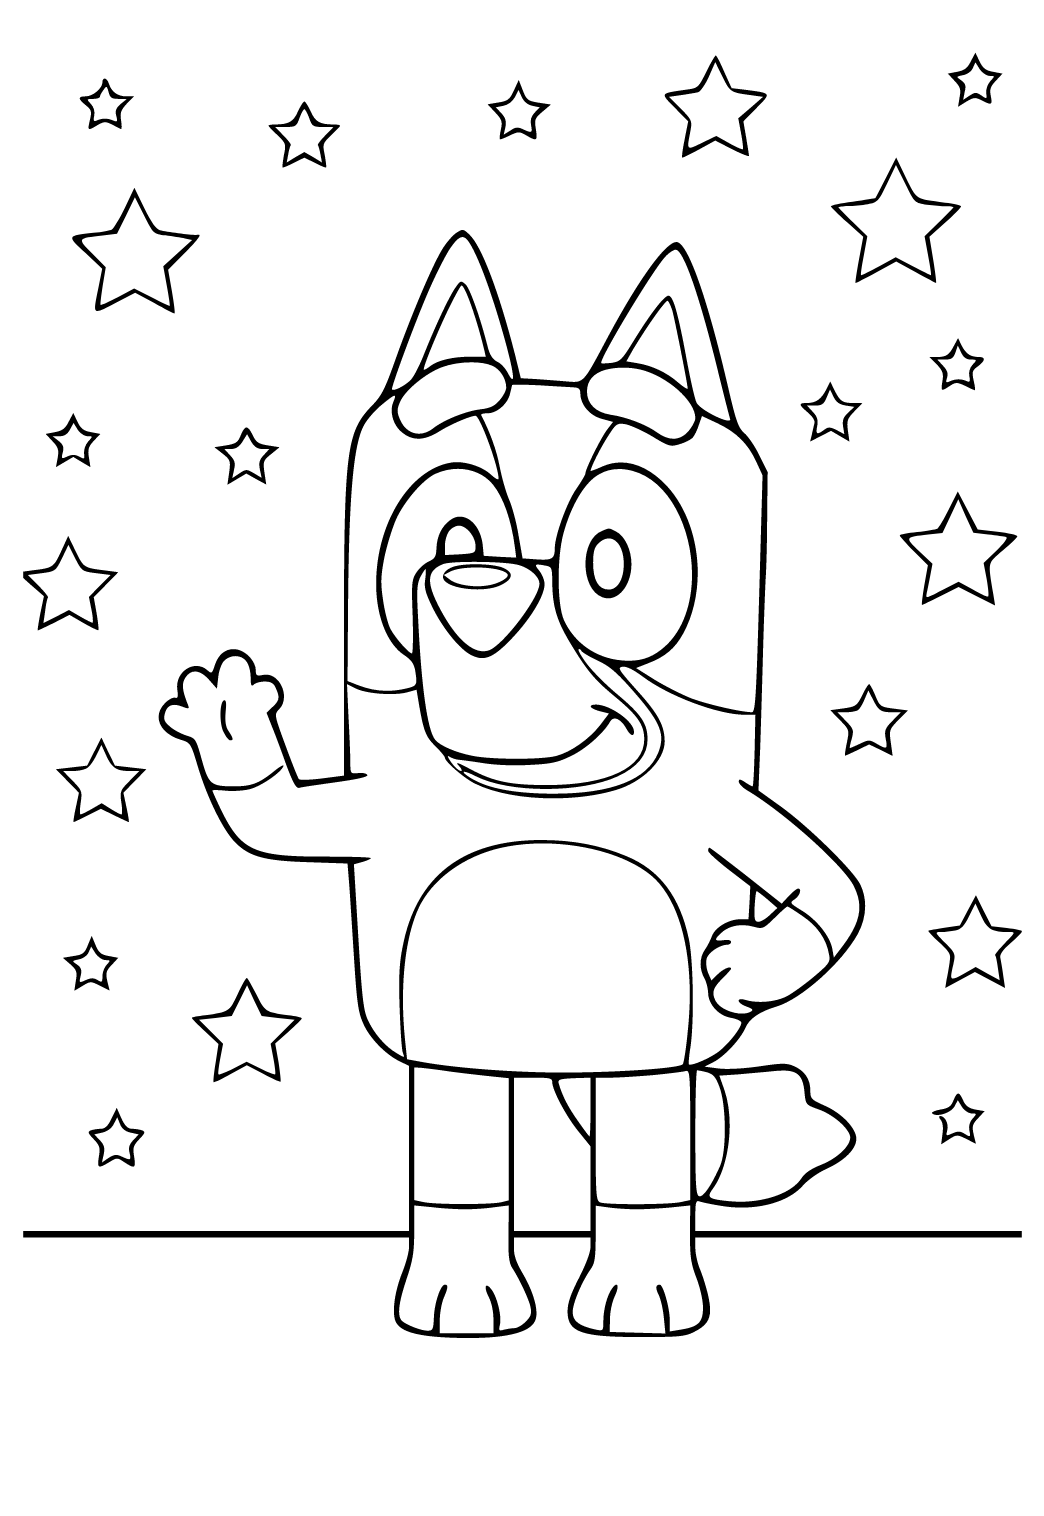 coloring pages of backgrounds